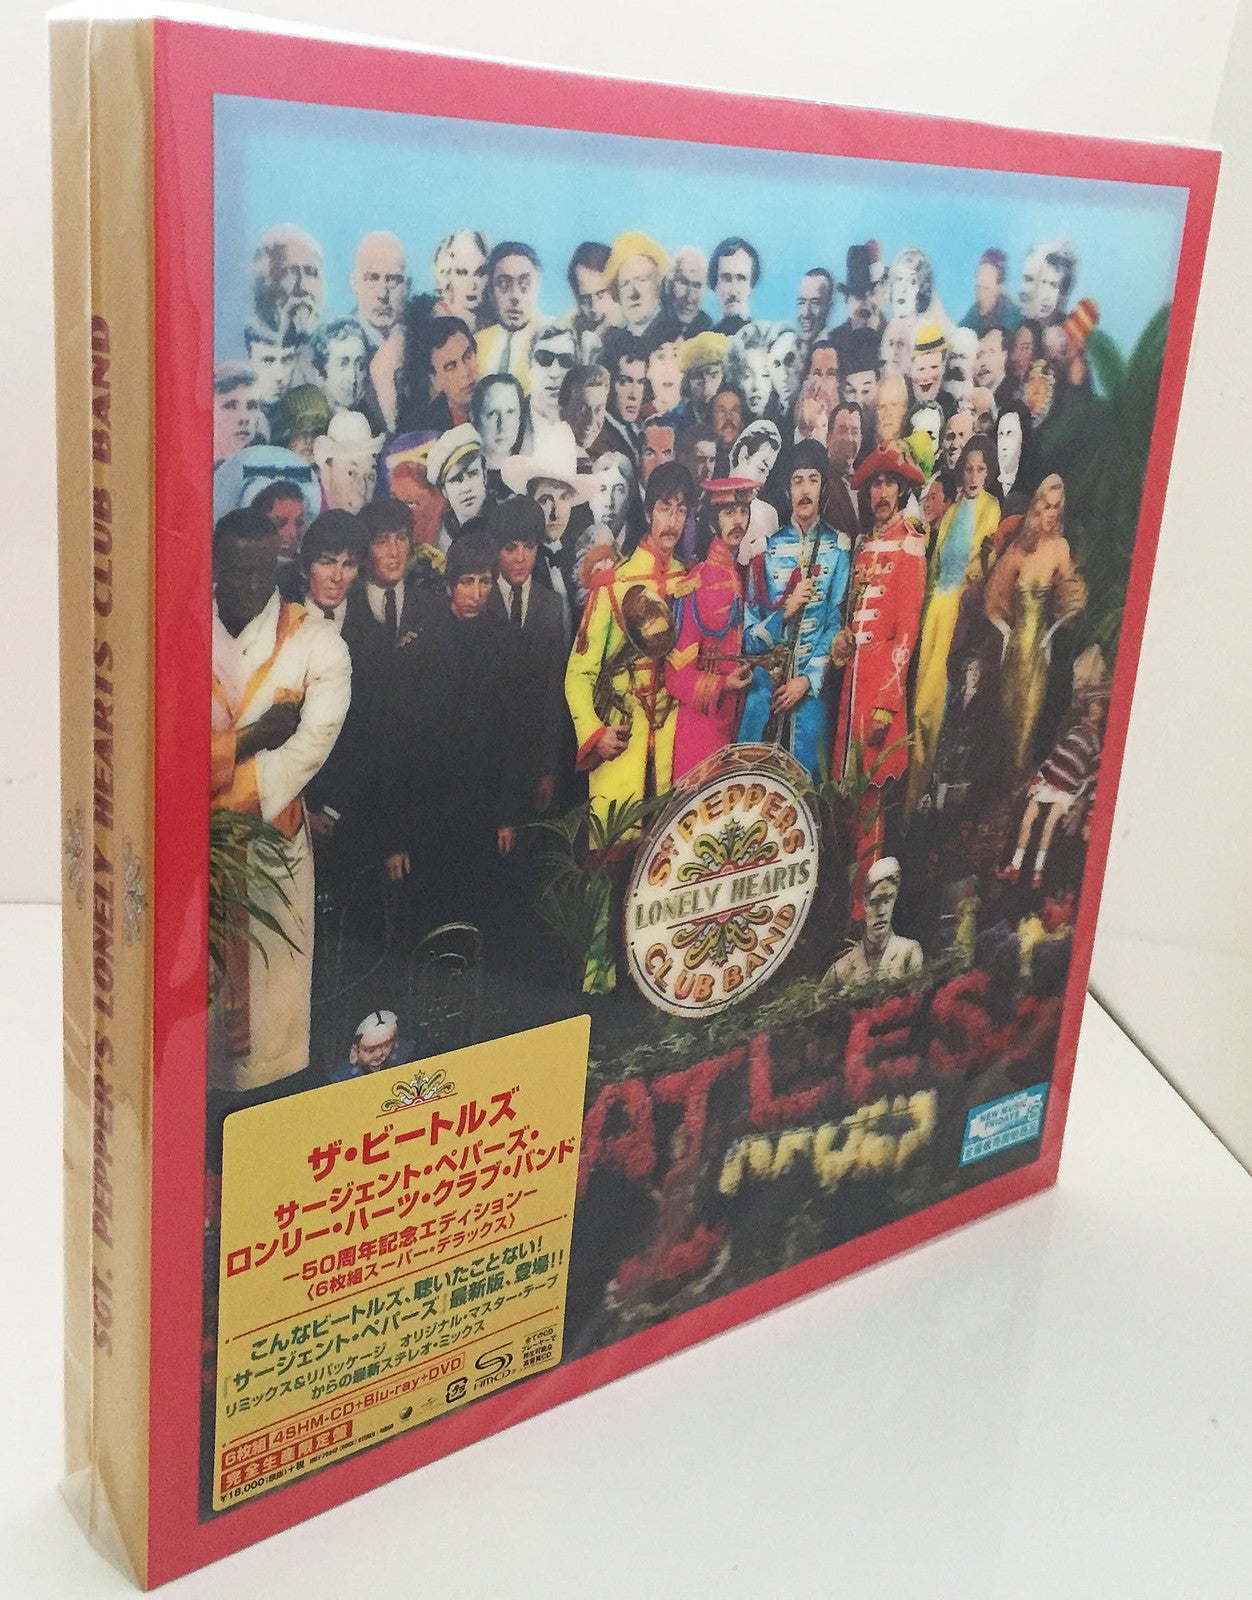 The Beatles - Sgt. Pepper'S Lonely Hearts Club Band - Japan 4 SHM